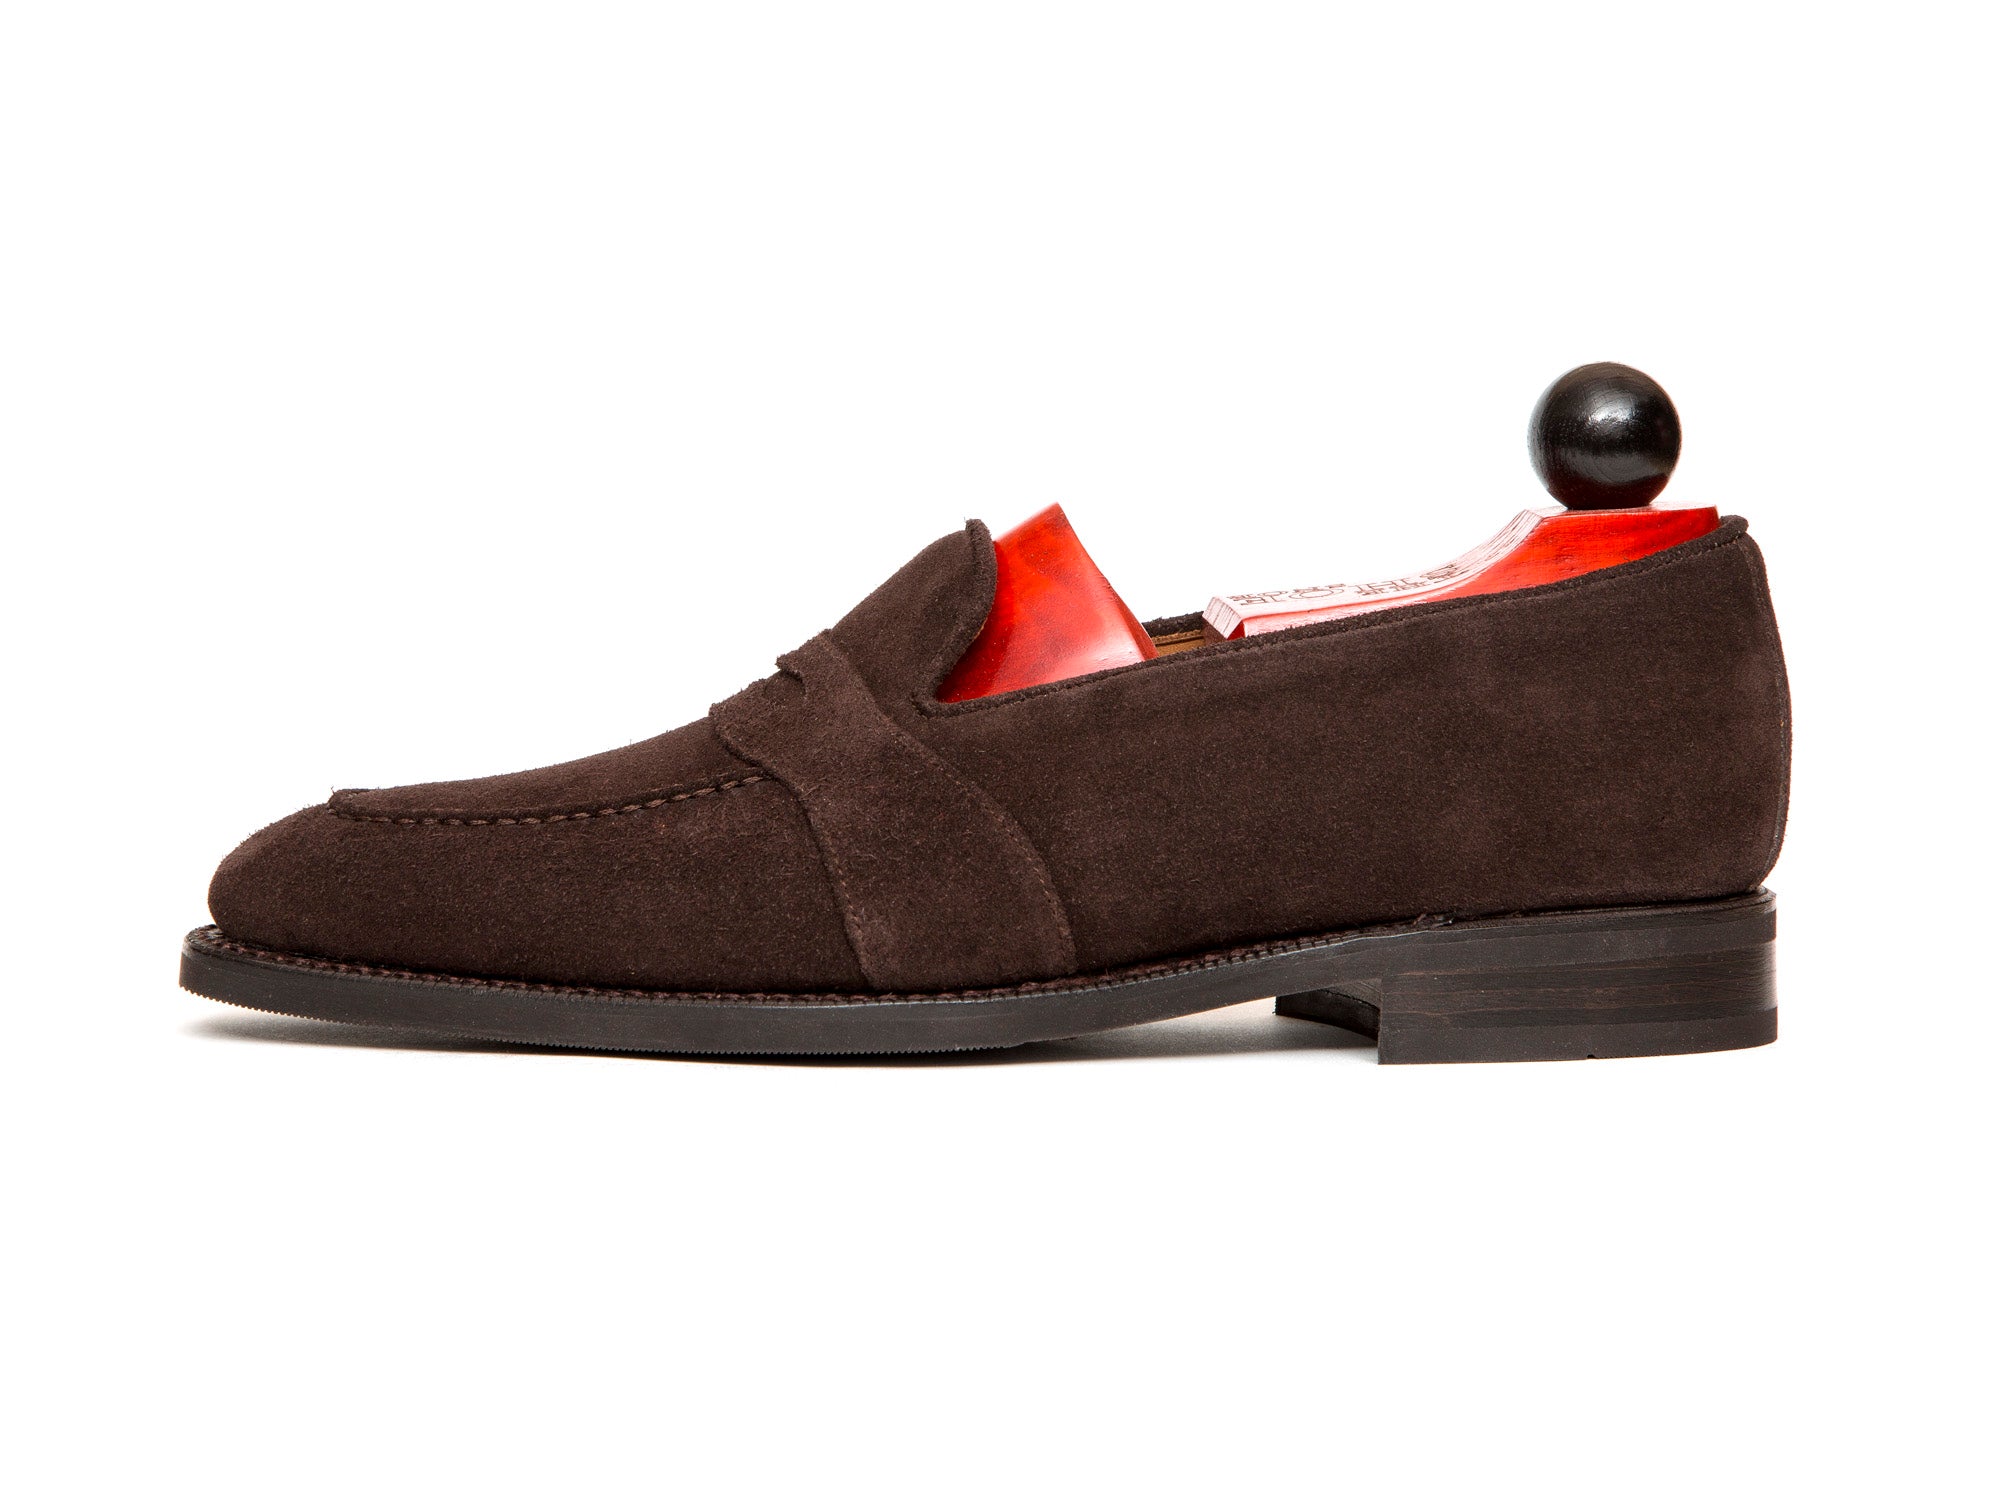 Madison - MTO - Bitter Chocolate Suede - LPB Last - City Rubber Sole